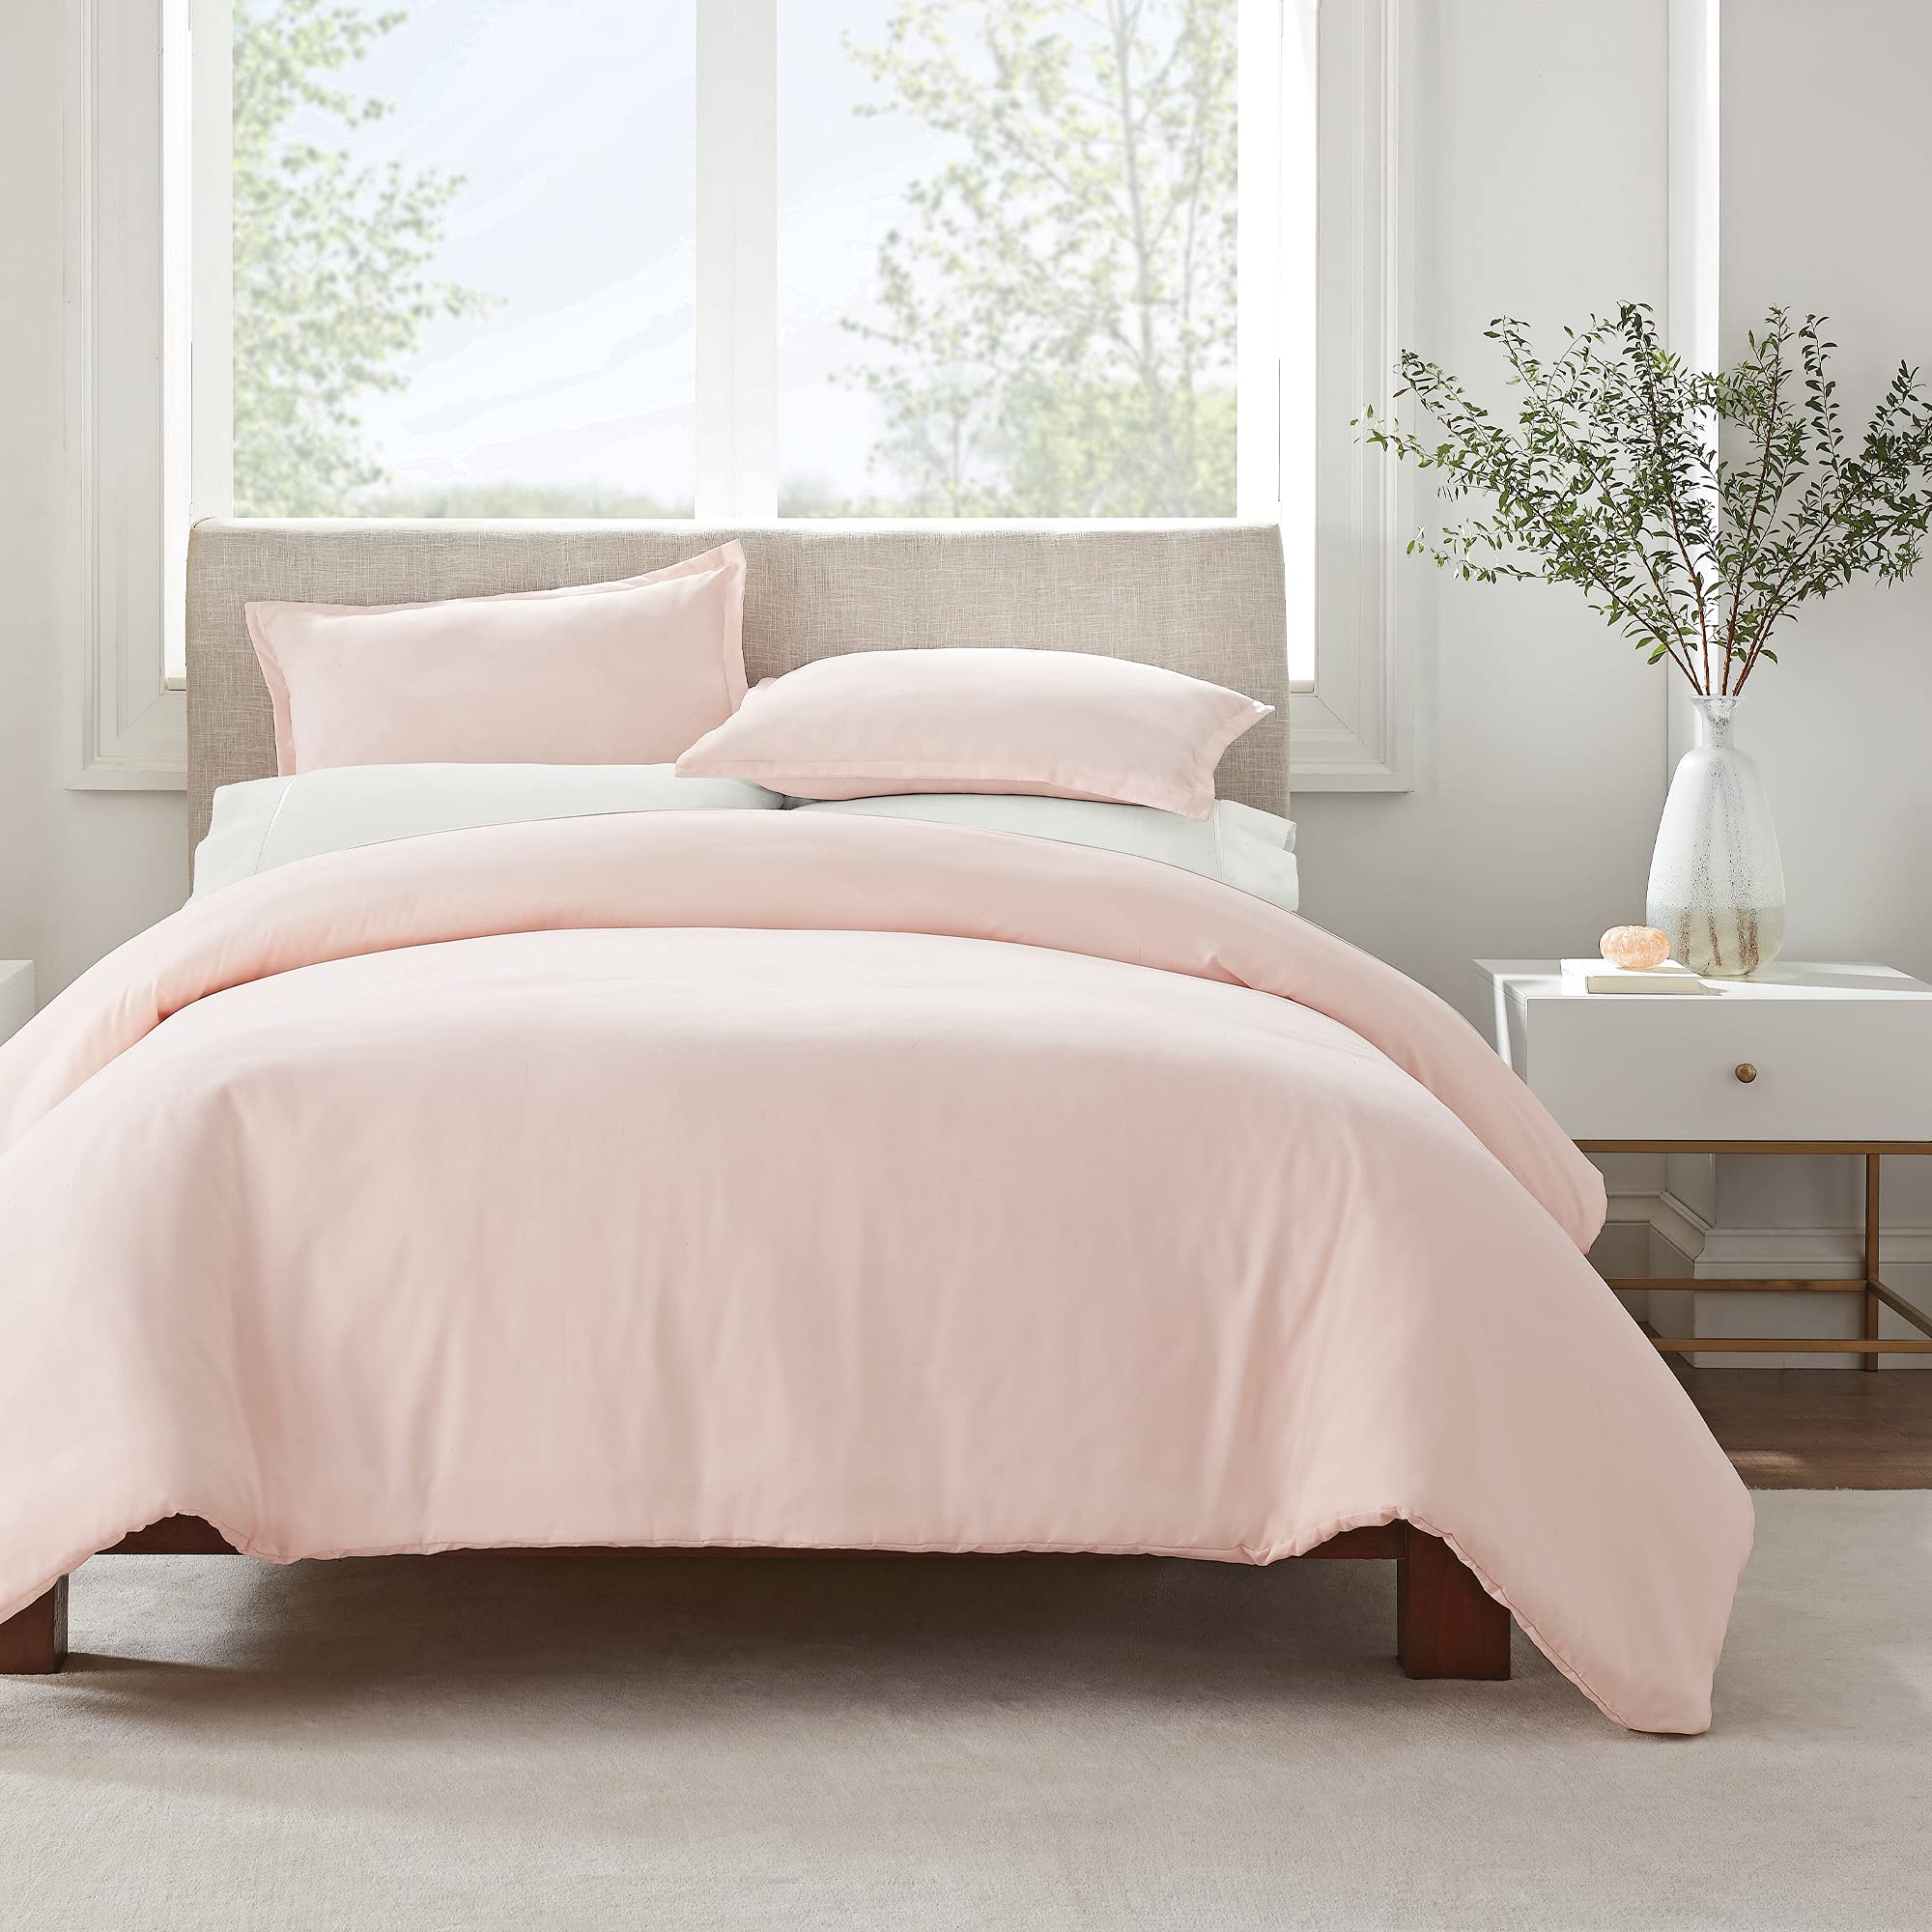 SERTA Simply Clean Ultra Soft Hypoallergenic Stain Resistant 2 Piece Solid Duvet Cover Set, Blush, Twin/Twin XL